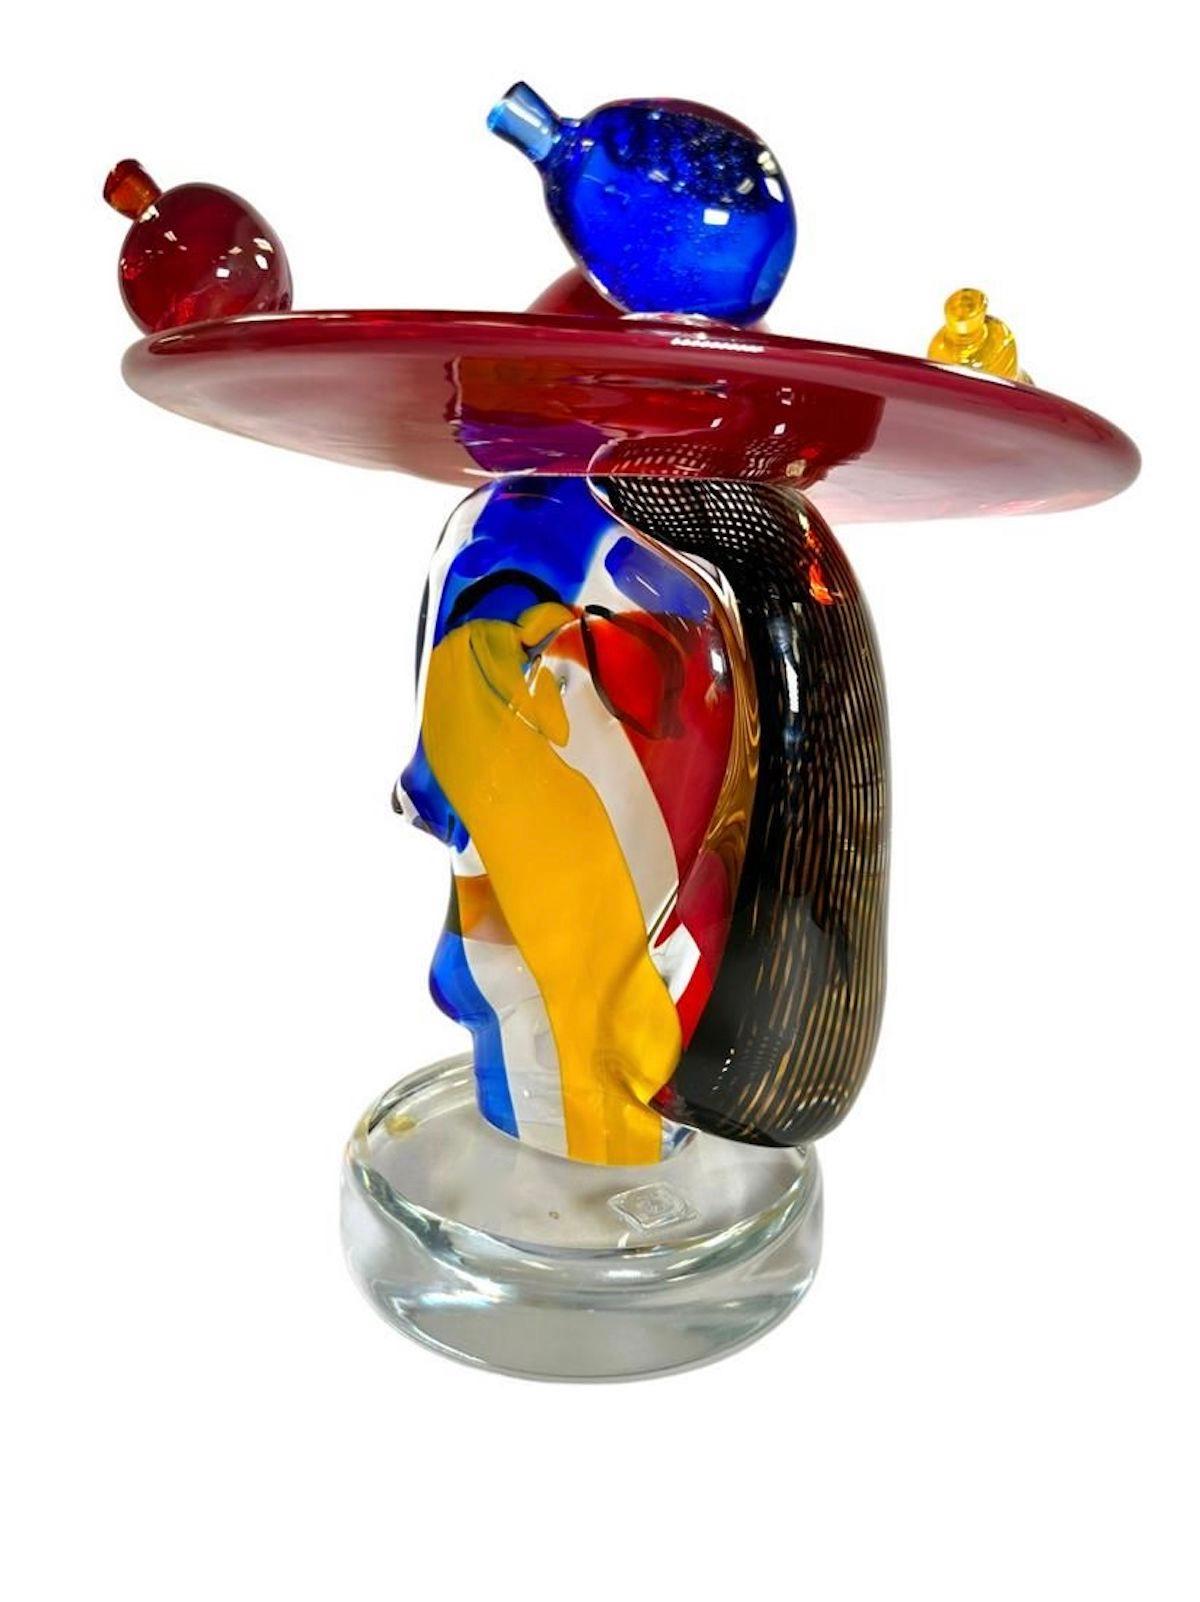 Omaggio To Picasso Woman in Hat Murano Glass Sculpture 
Artist signed and titled.
 Walter Furlan was born (1931-2018) in Chioggia, a small town near Venice. He started to work in a furnace called “VAMSA” very early. He apprenticed from one of the